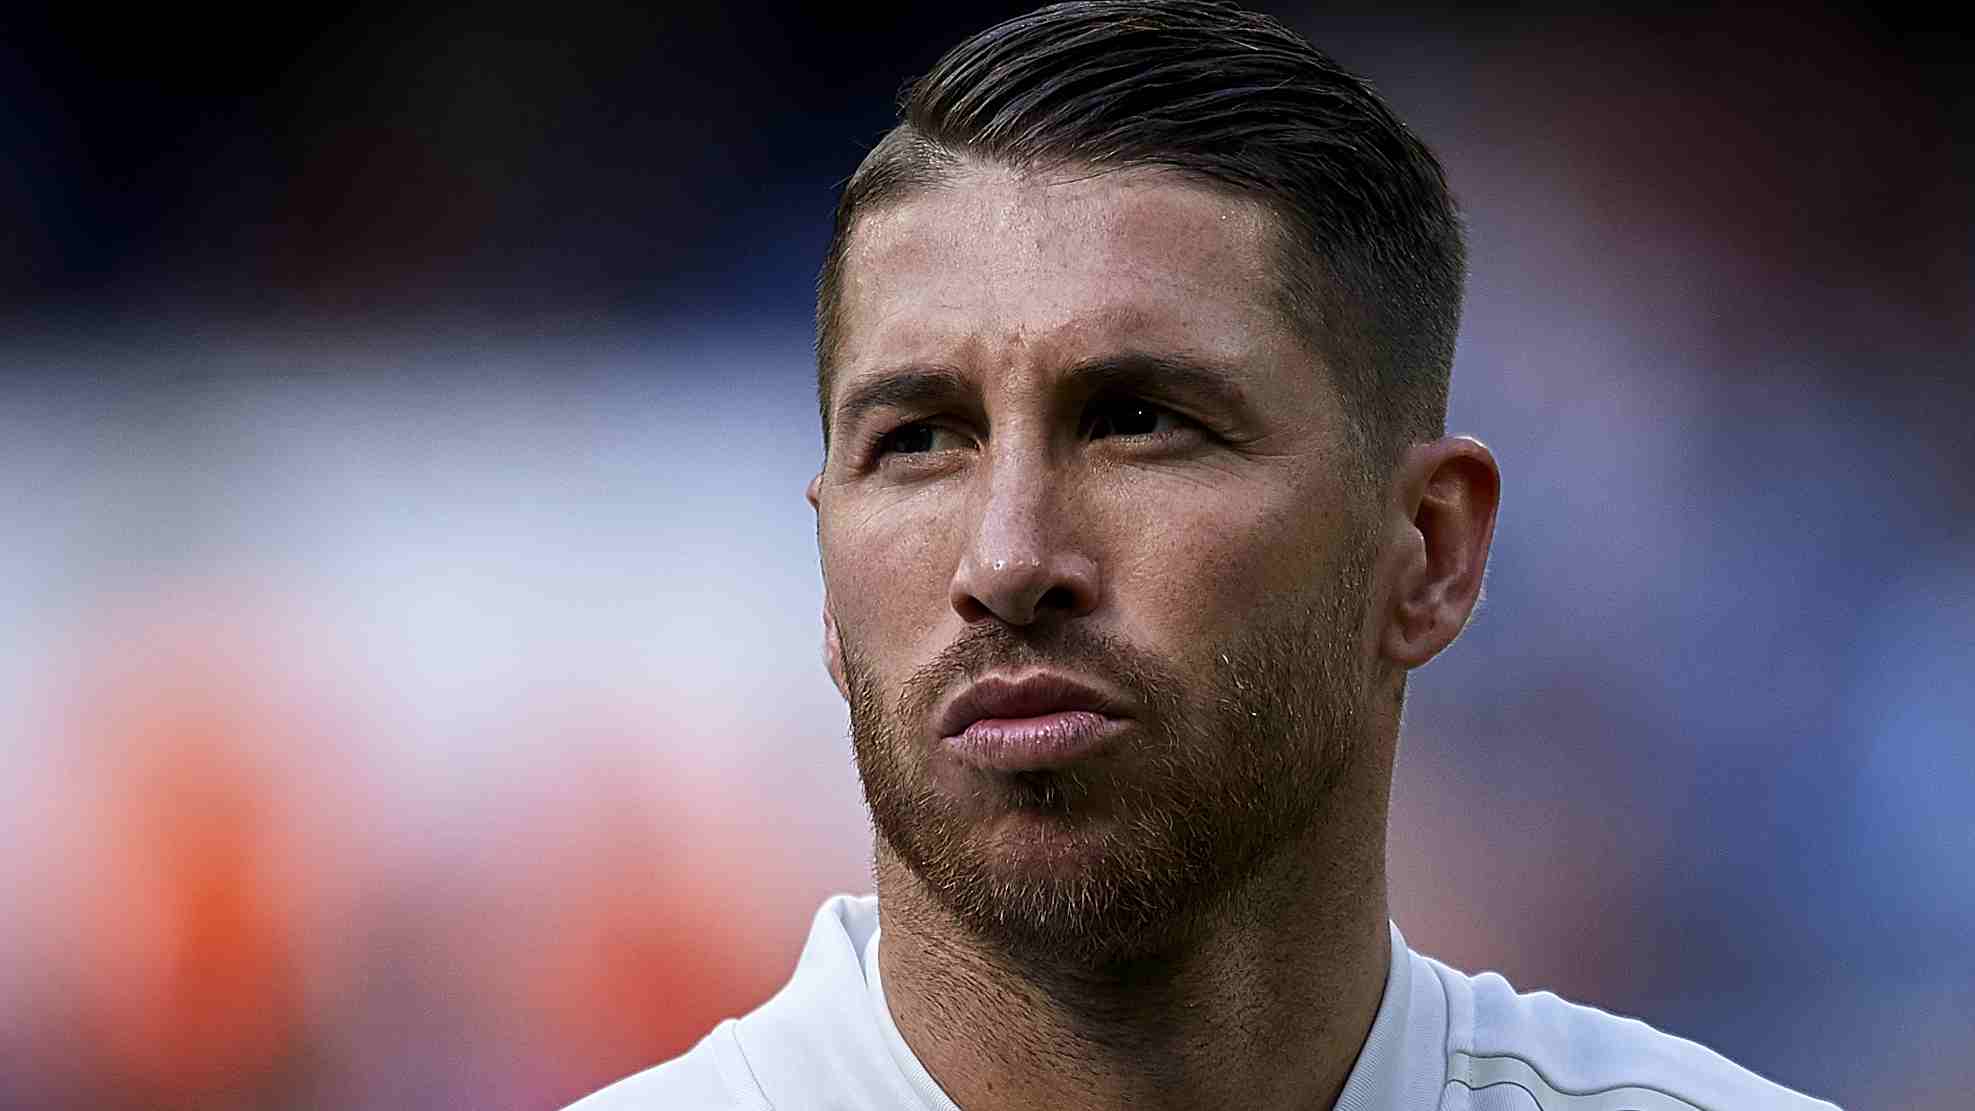 Manchester United target Sergio Ramos ready to sign new deal at Real Madrid  | Football | Sport | Express.co.uk